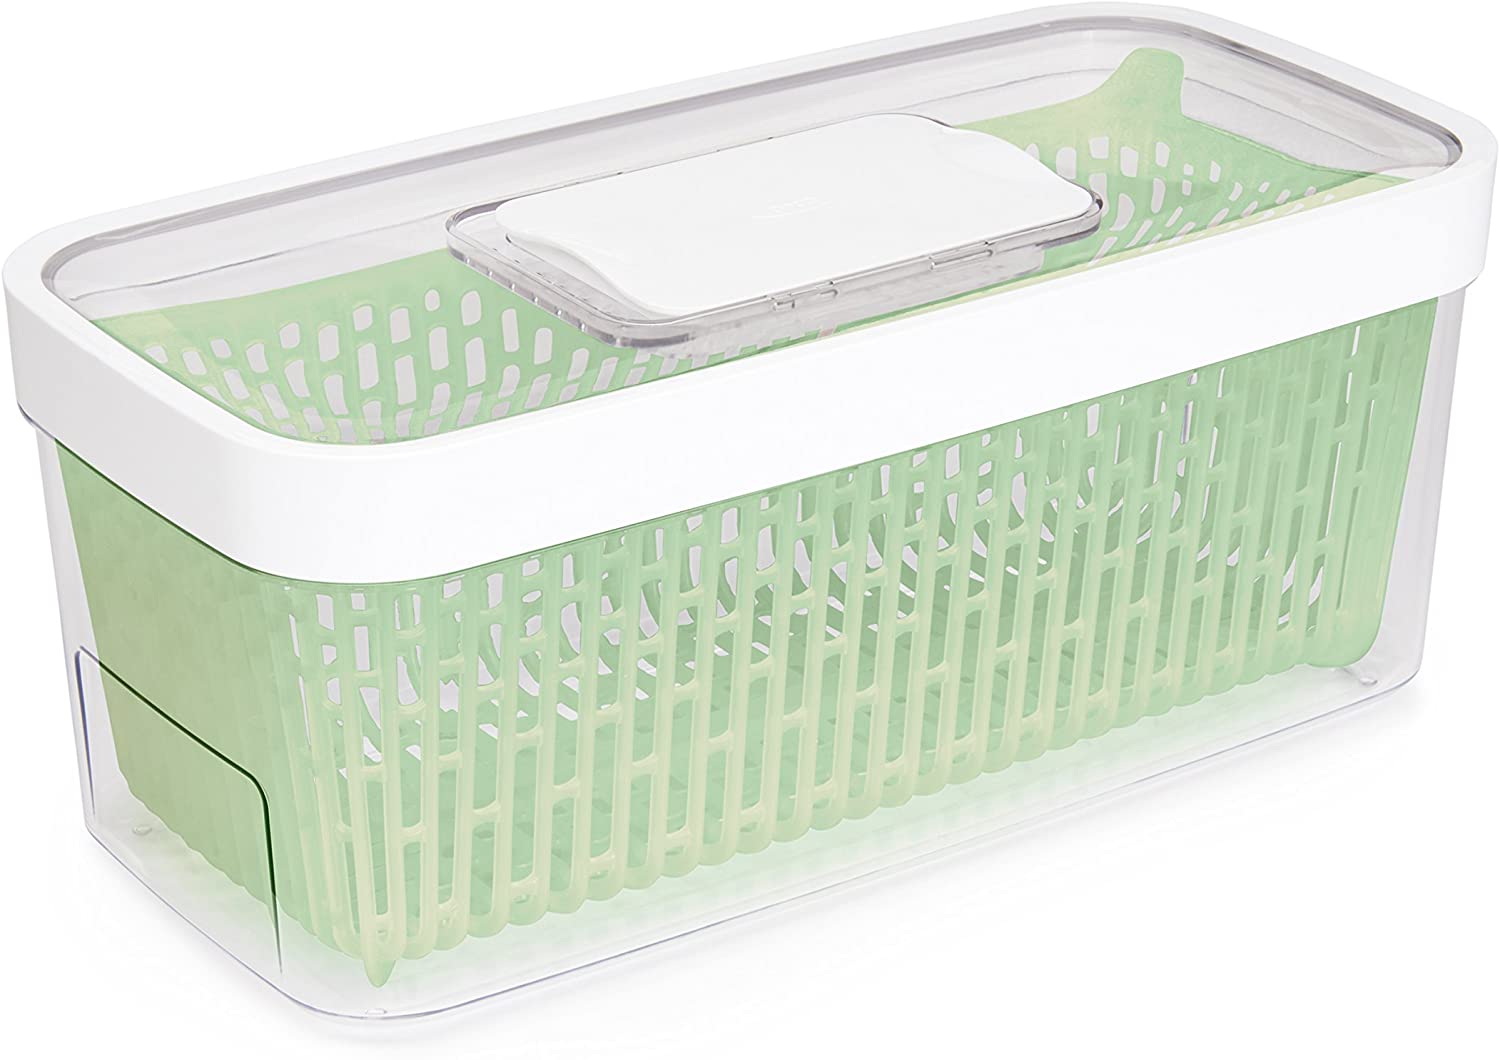 lime green and white container with lid